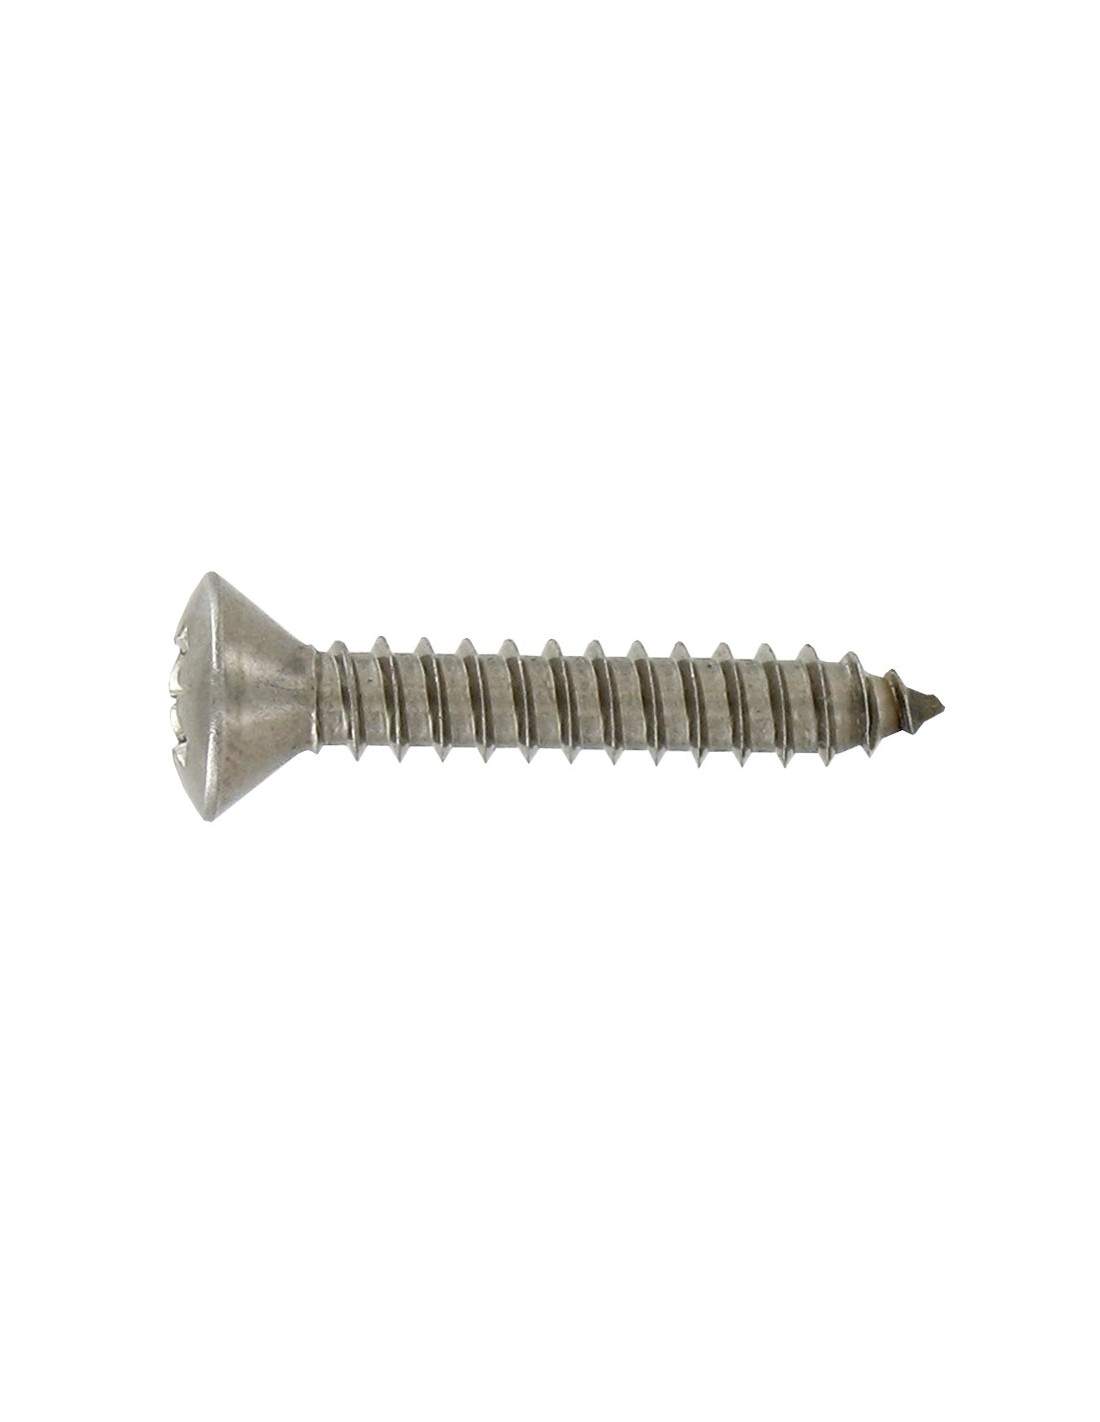 A4 stainless steel countersunk head screws 4.8x19, 13 pcs.